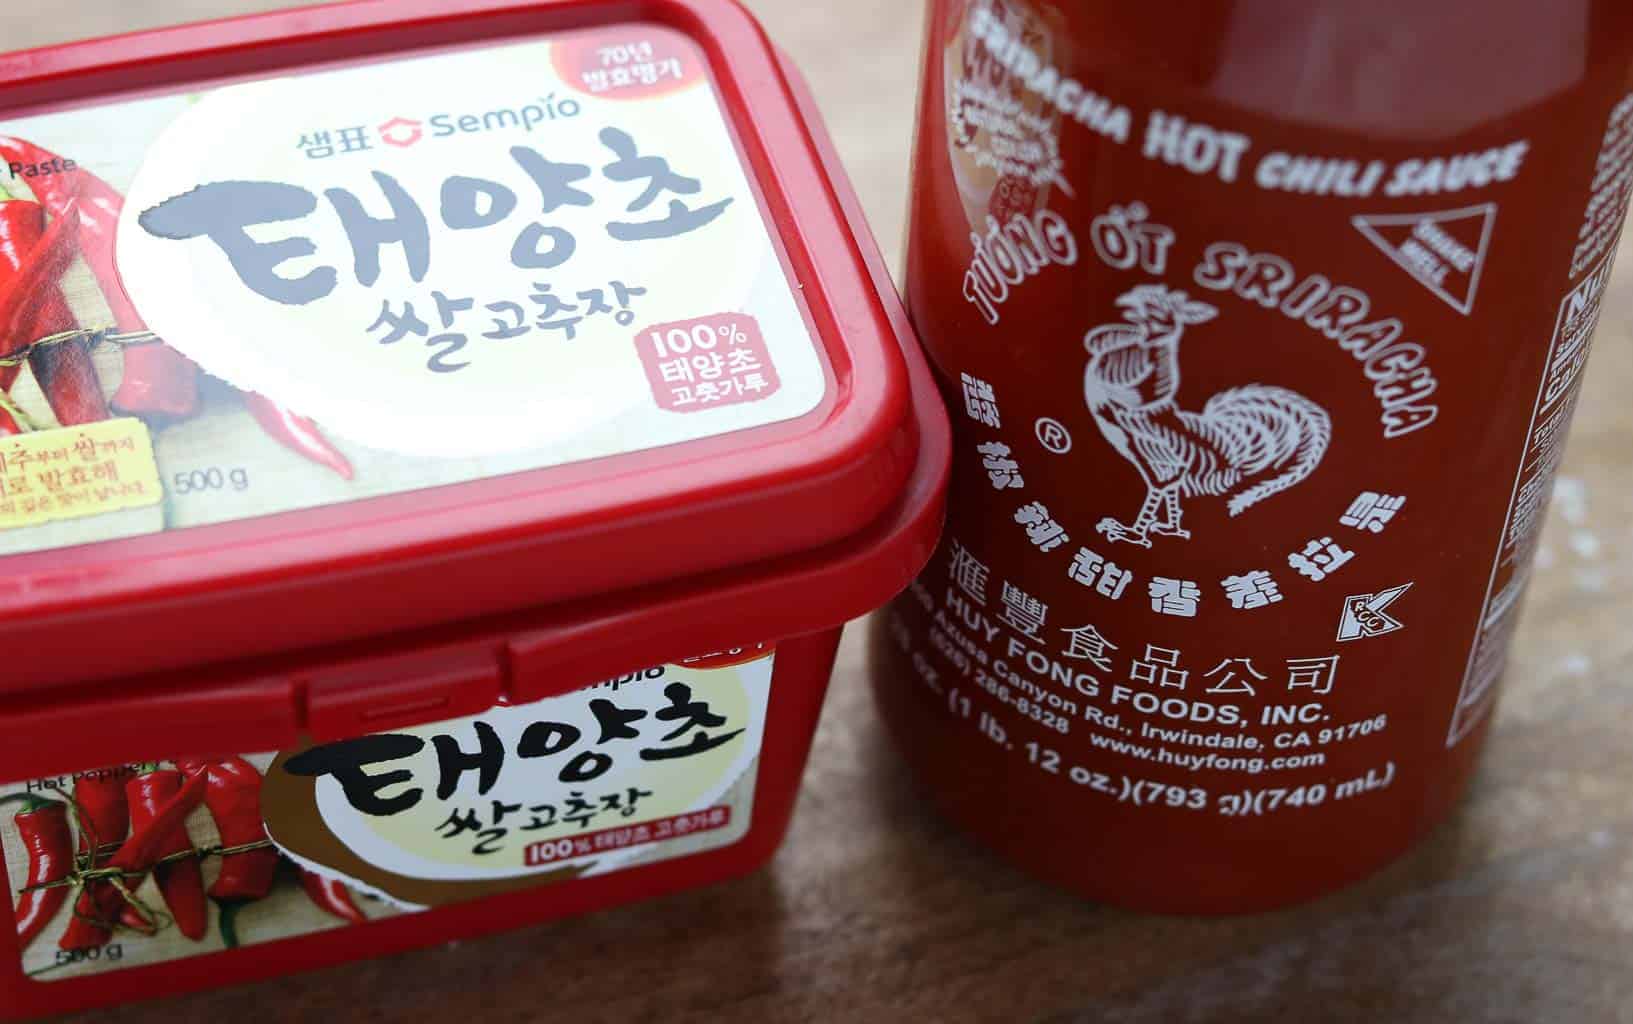 Gochujang and Sriracha sauce in original containers on a wooden board from Gourmet Done Skinny